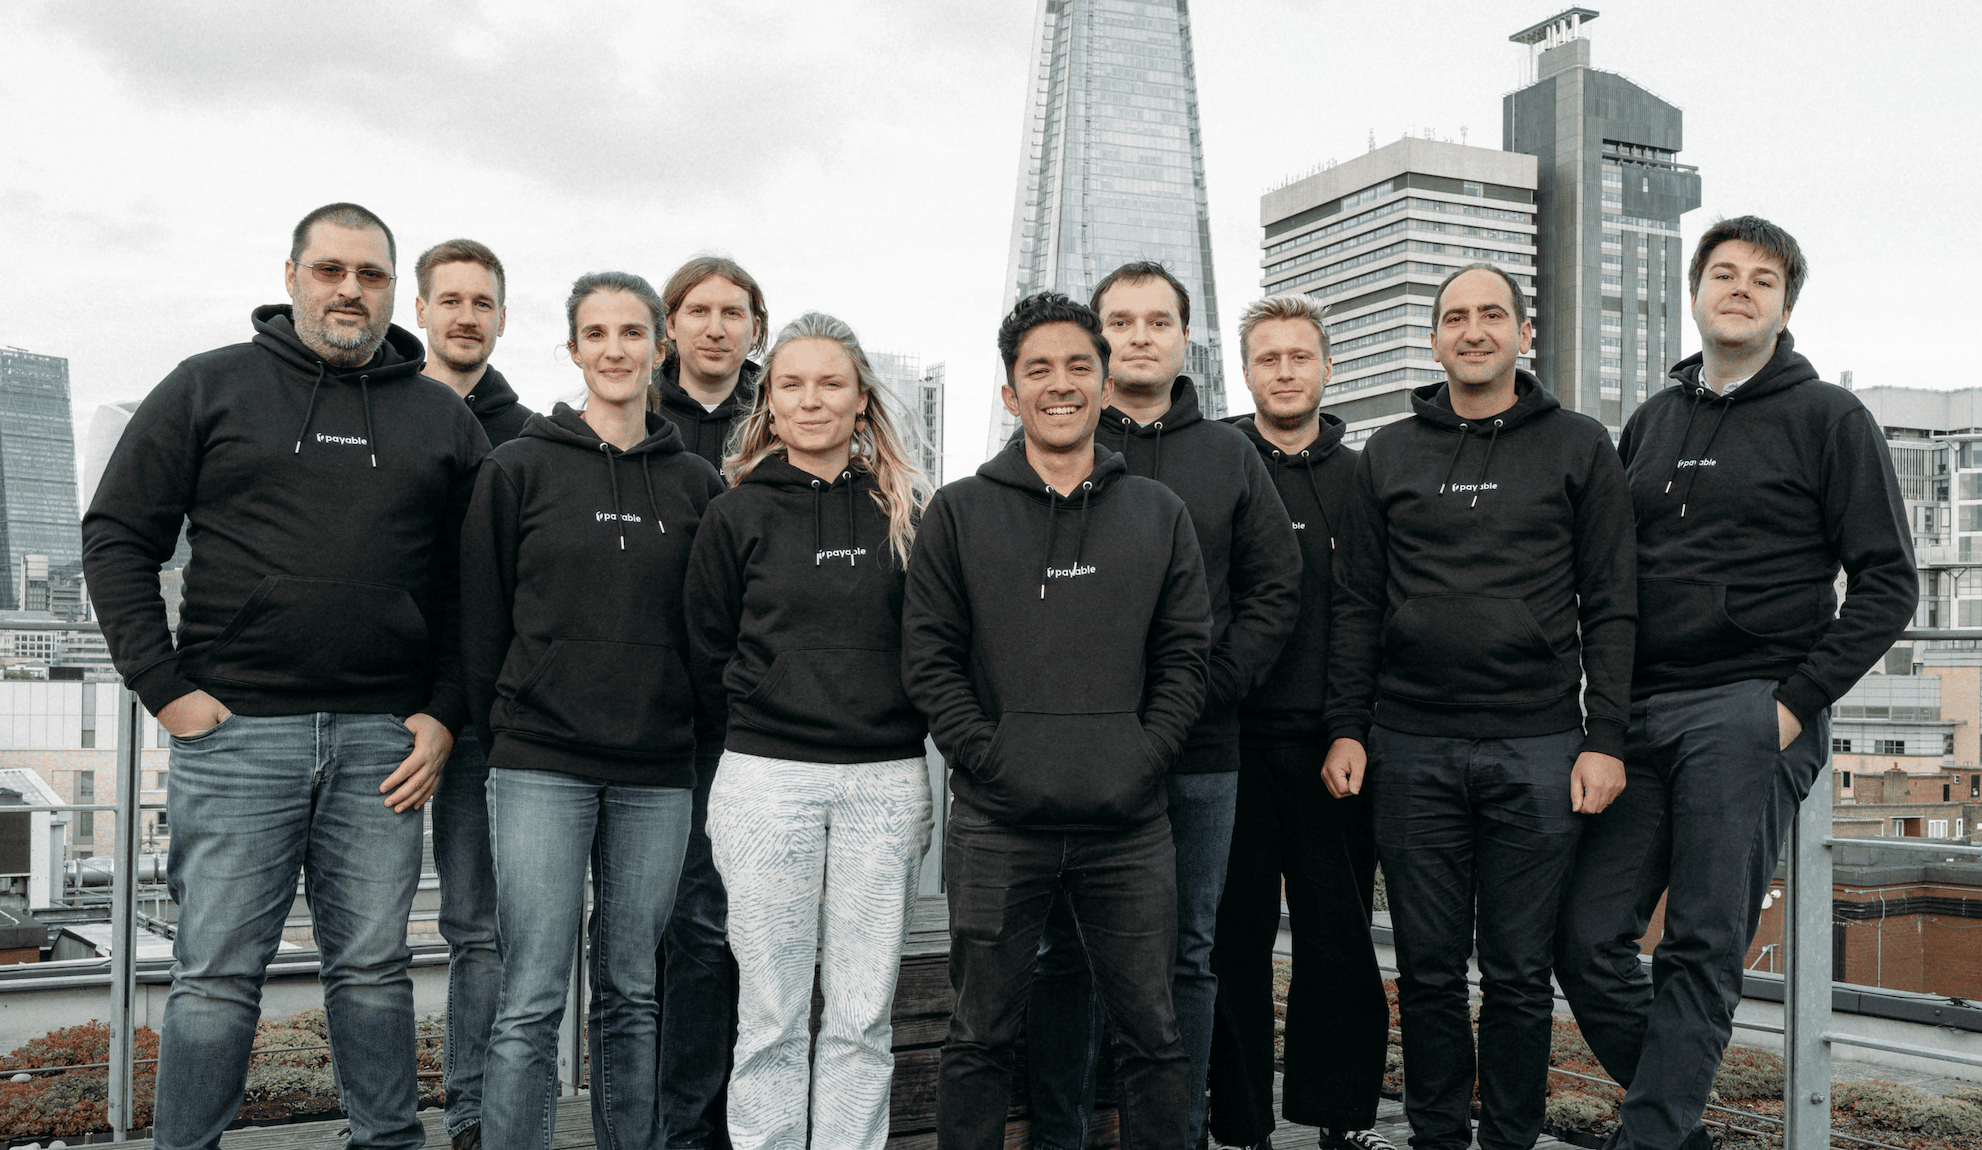 London-based Payable picks up €6 million to build the modern infrastructure of money movement